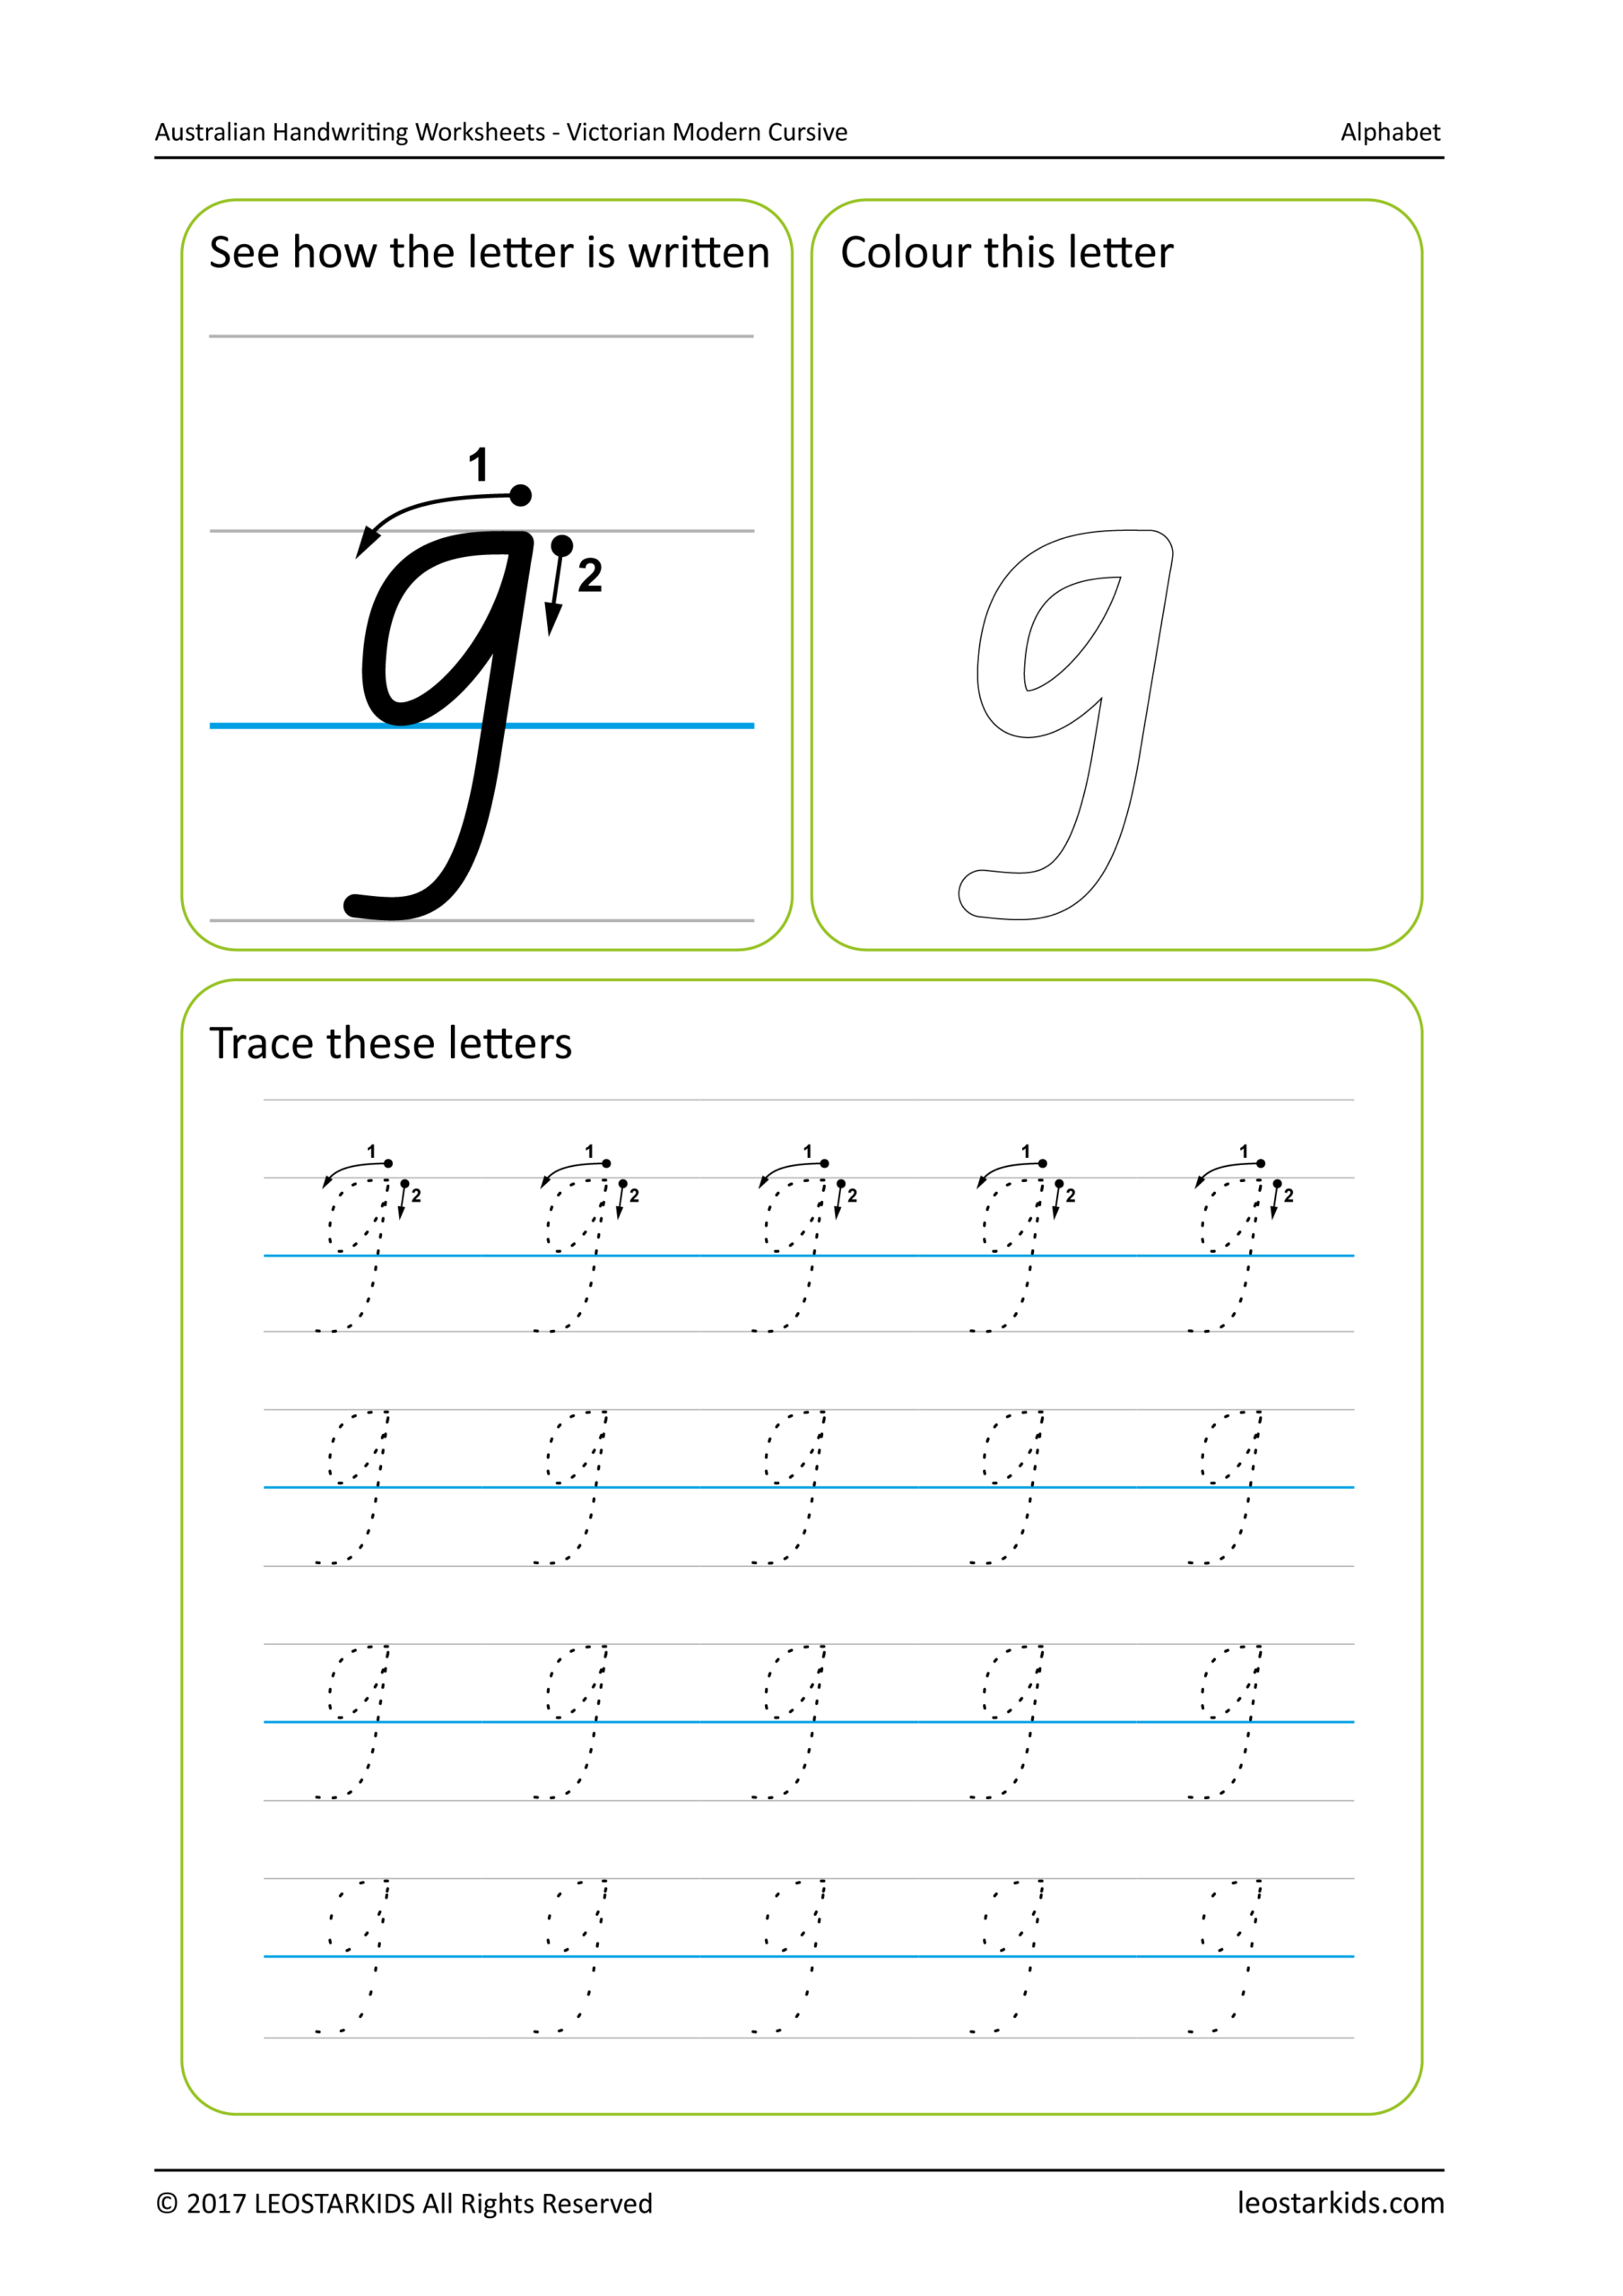 Coloring Book : Cursive Handwriting Practice Worksheets Free with Letter Tracing Worksheets Australia